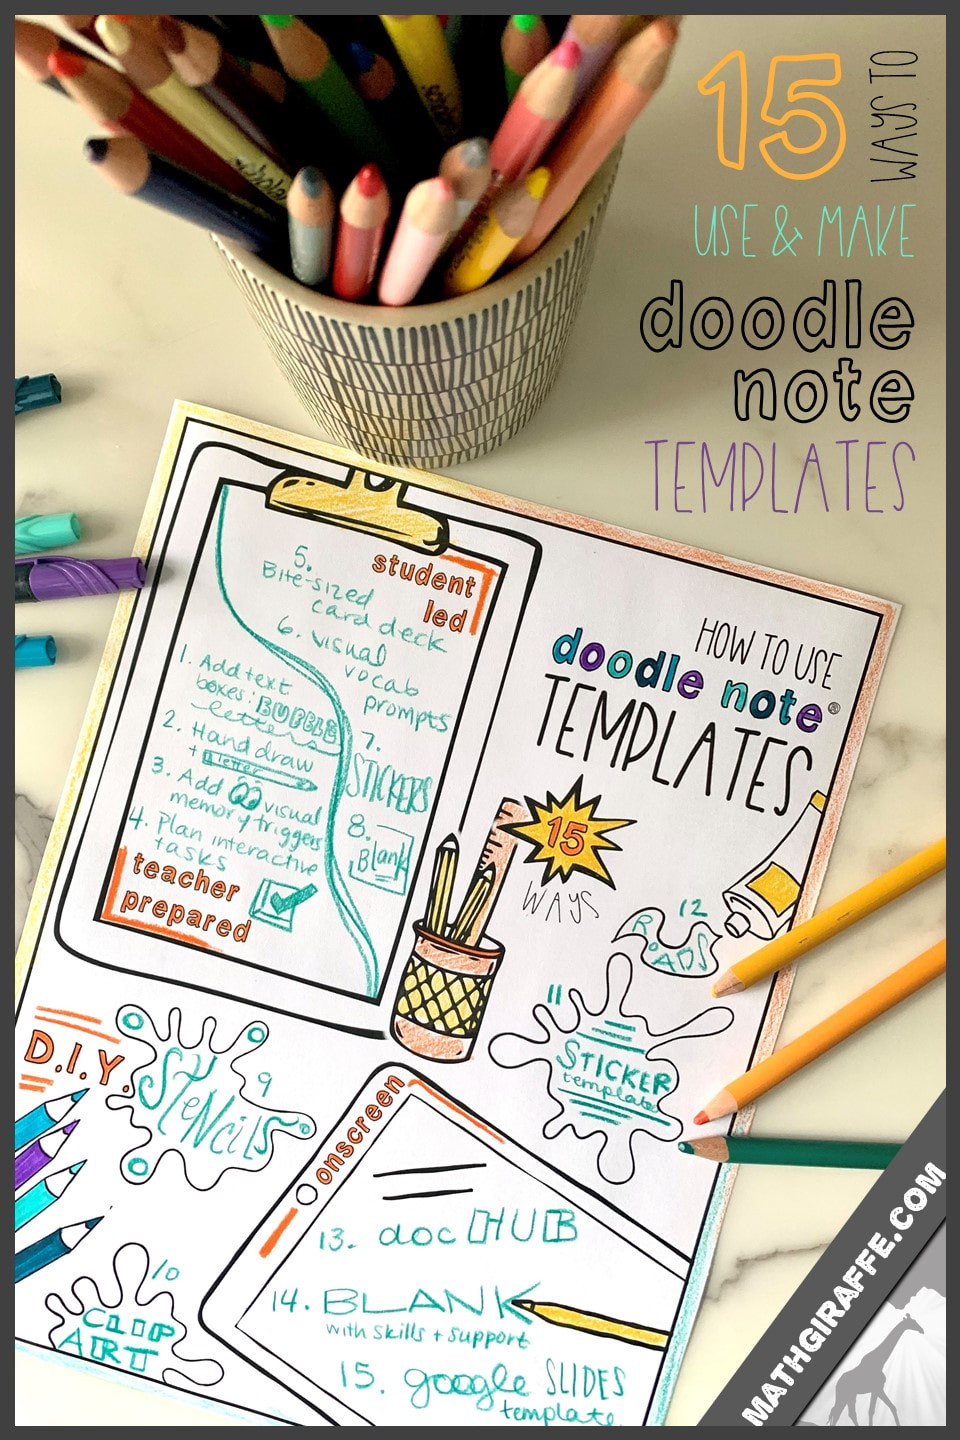 How to Use and Make Doodle Note Templates - D.I.Y. Doodle Notes